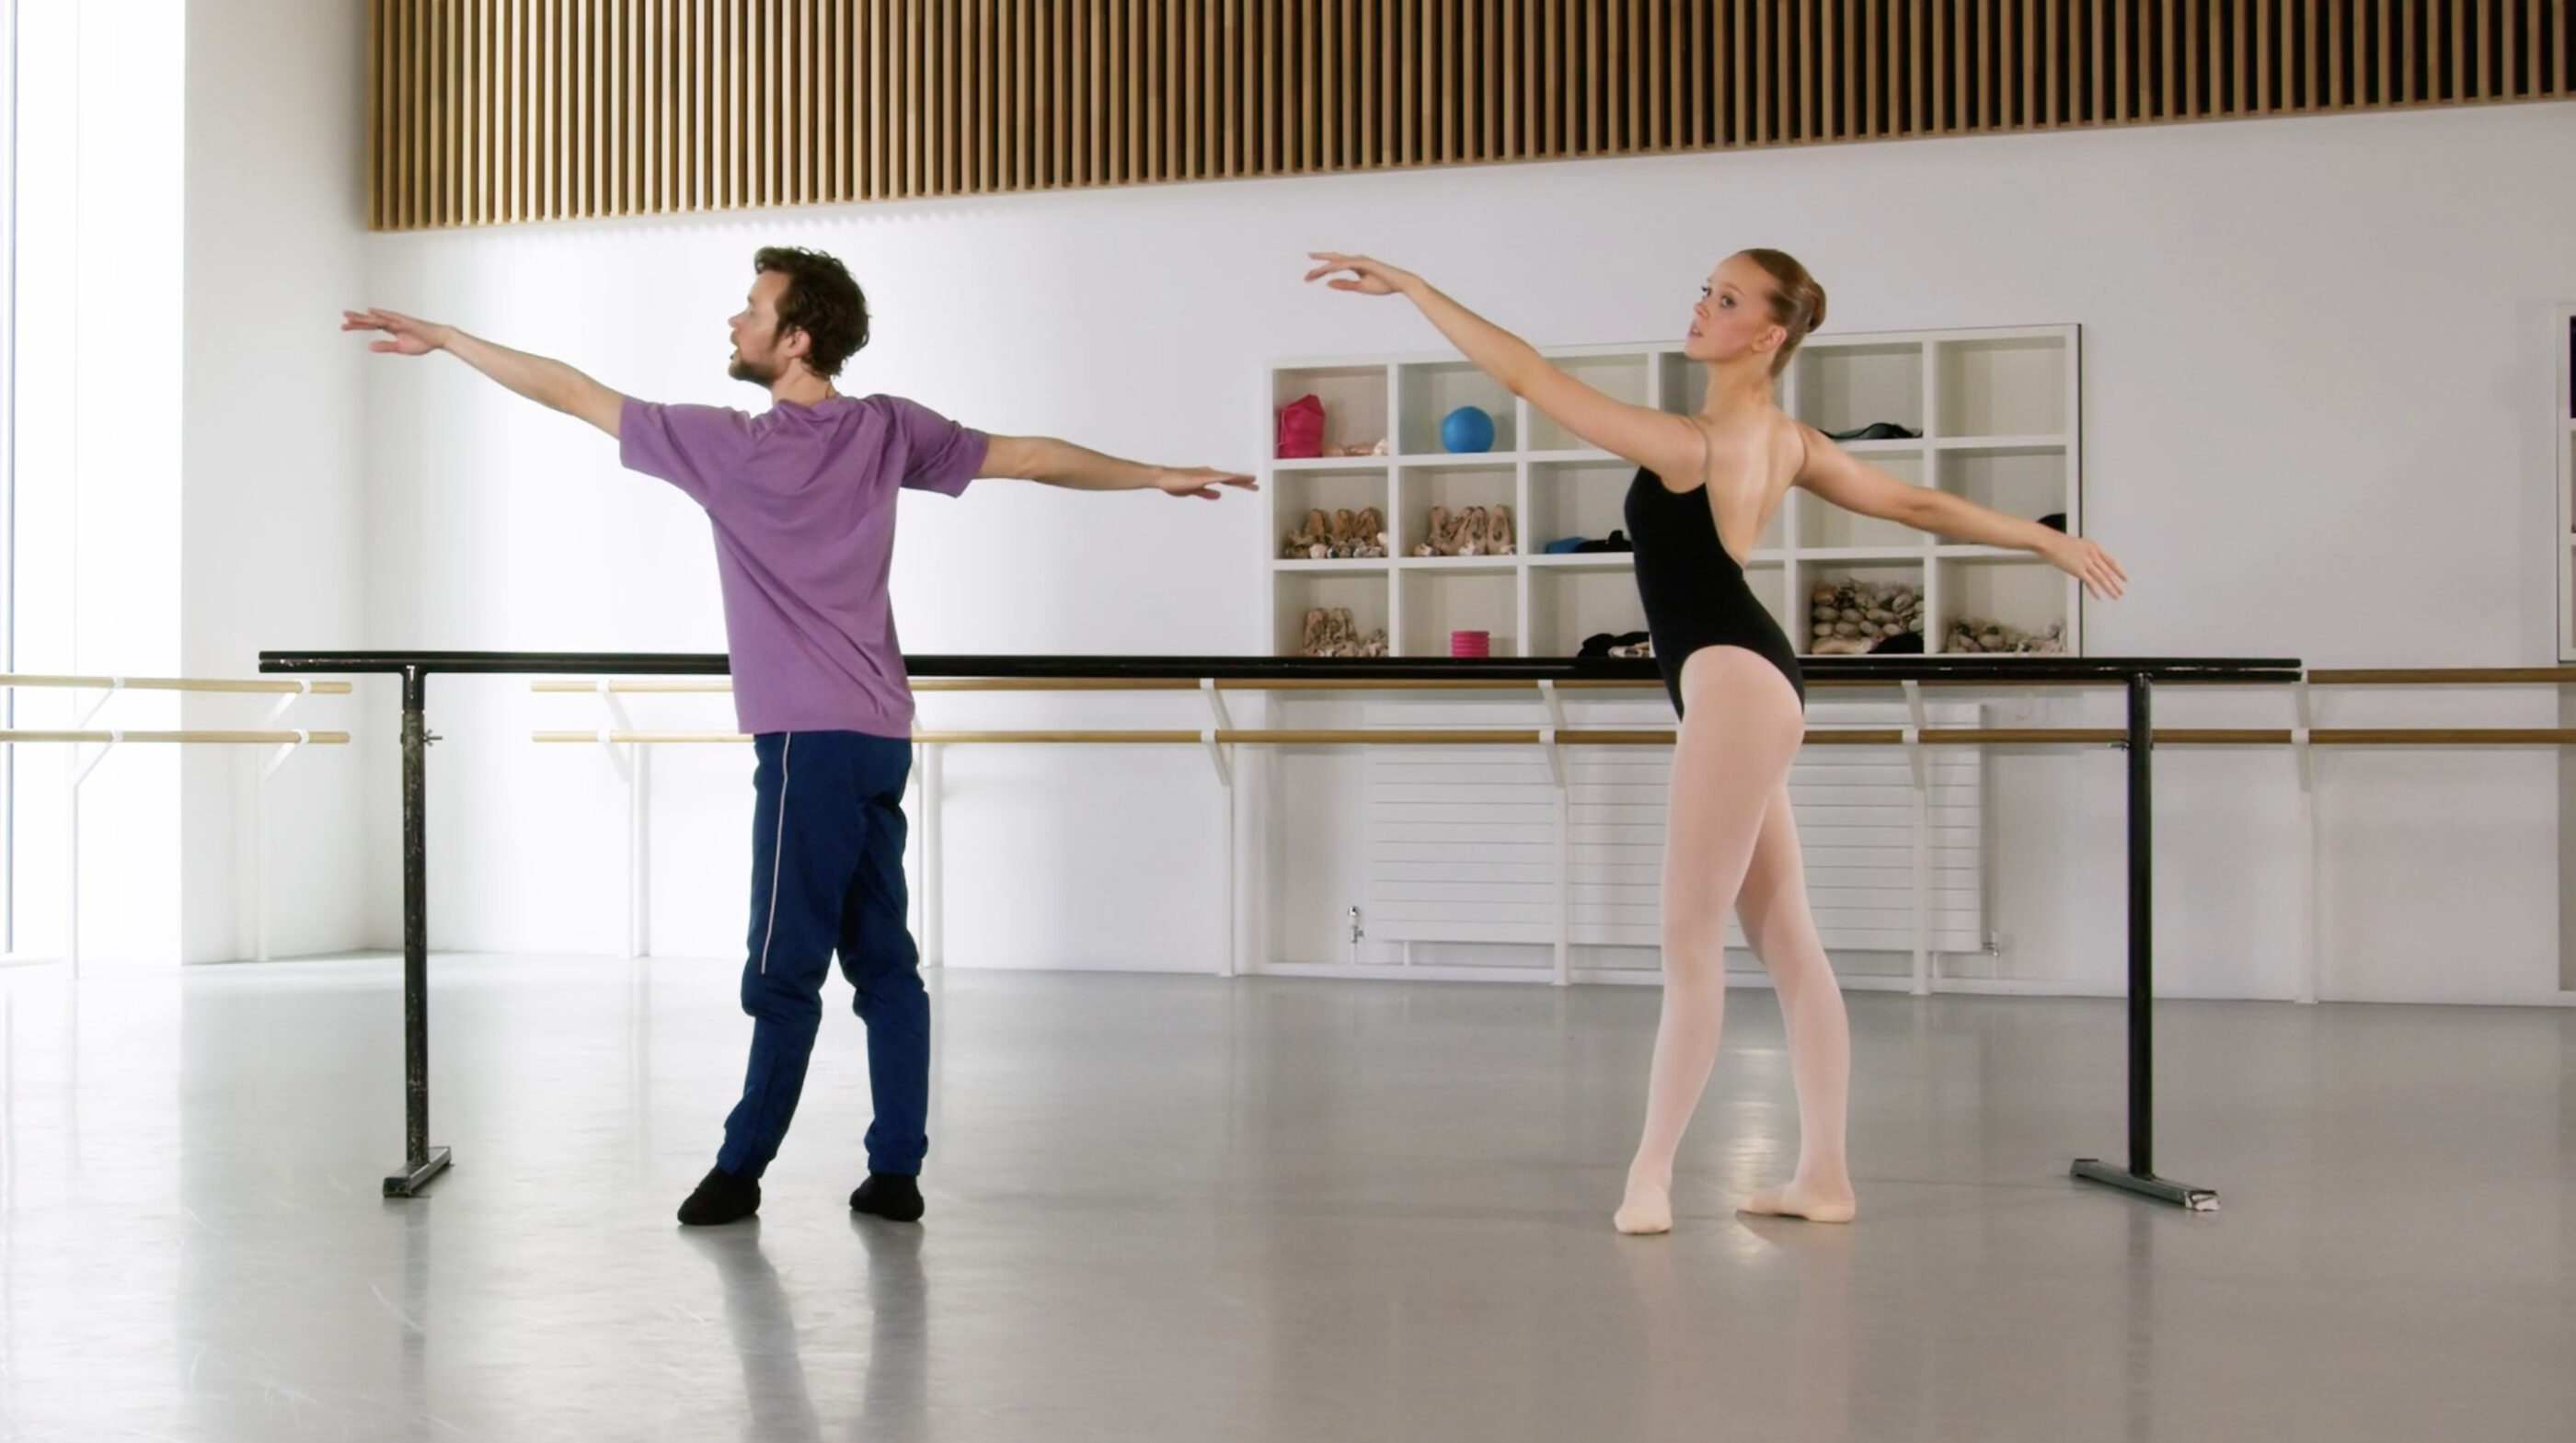 A ballet tutor and a demonstrator in an arabesque position at the barre